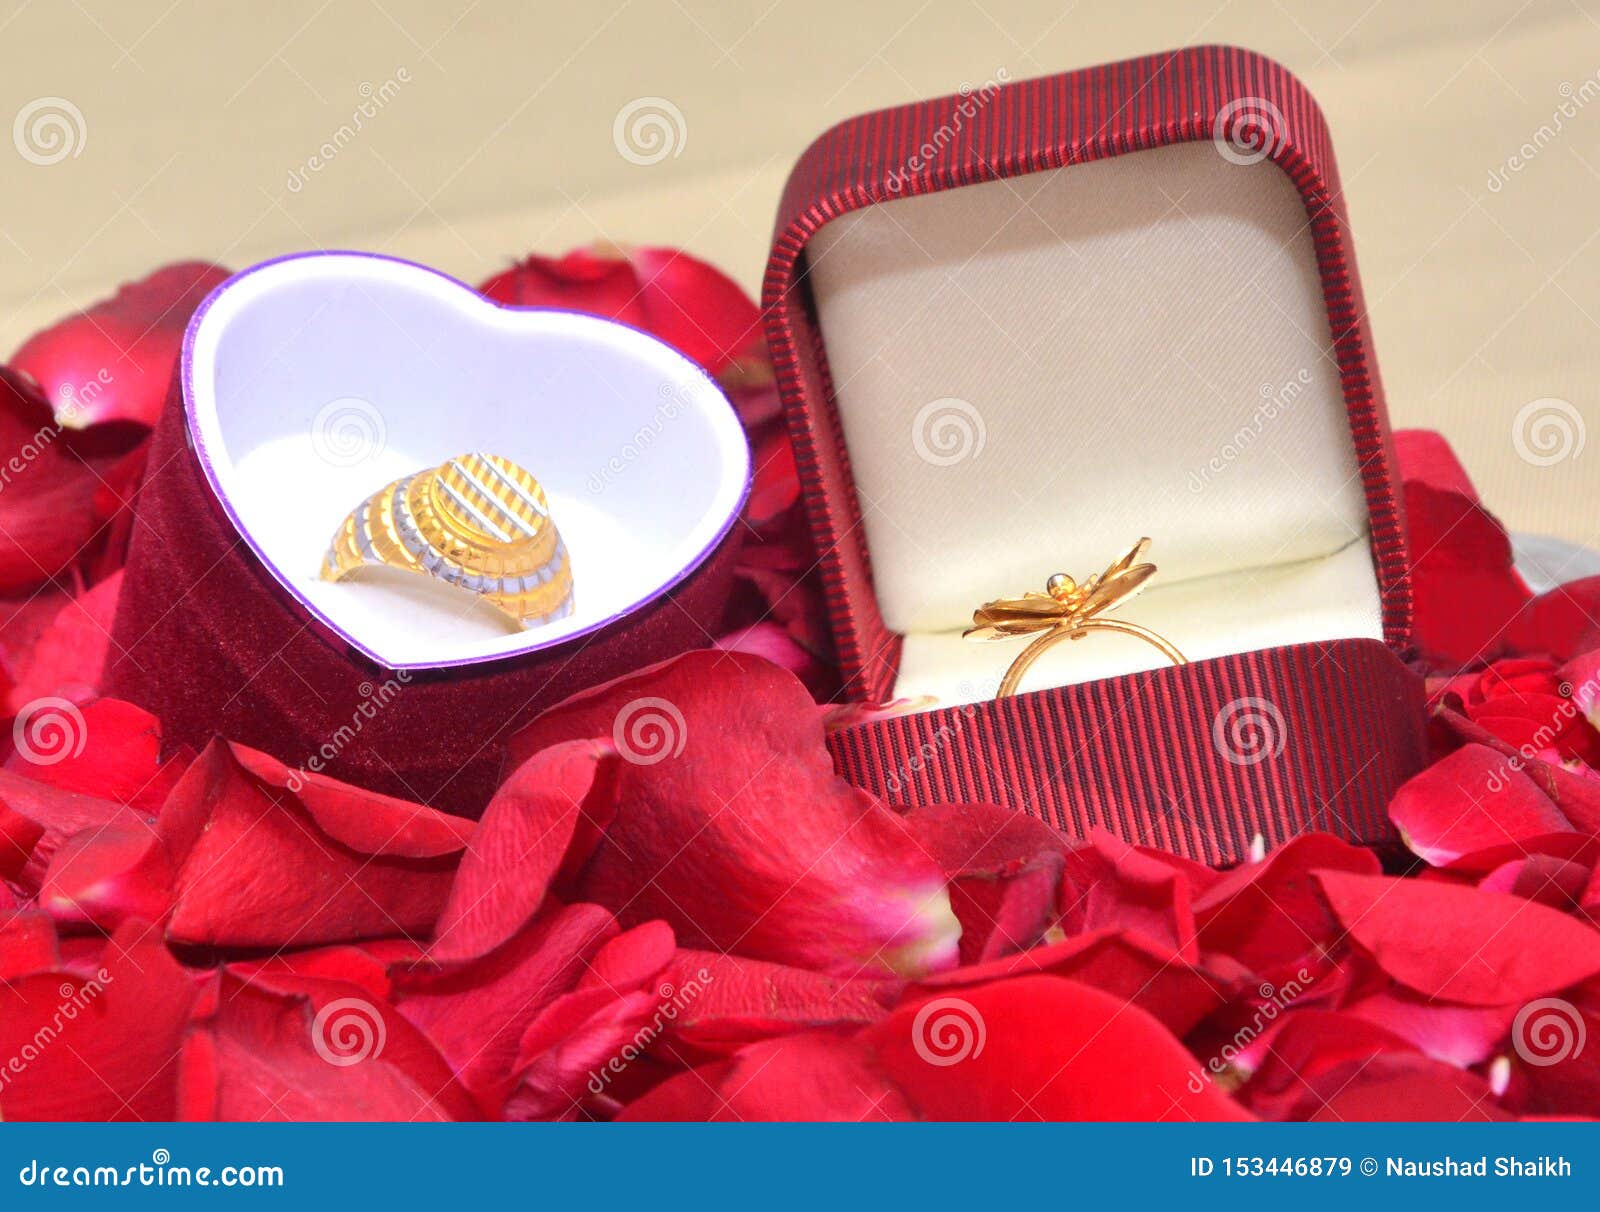 Find Marriage Ring Ceremony Stock Images Stock Image - Image of ring ...